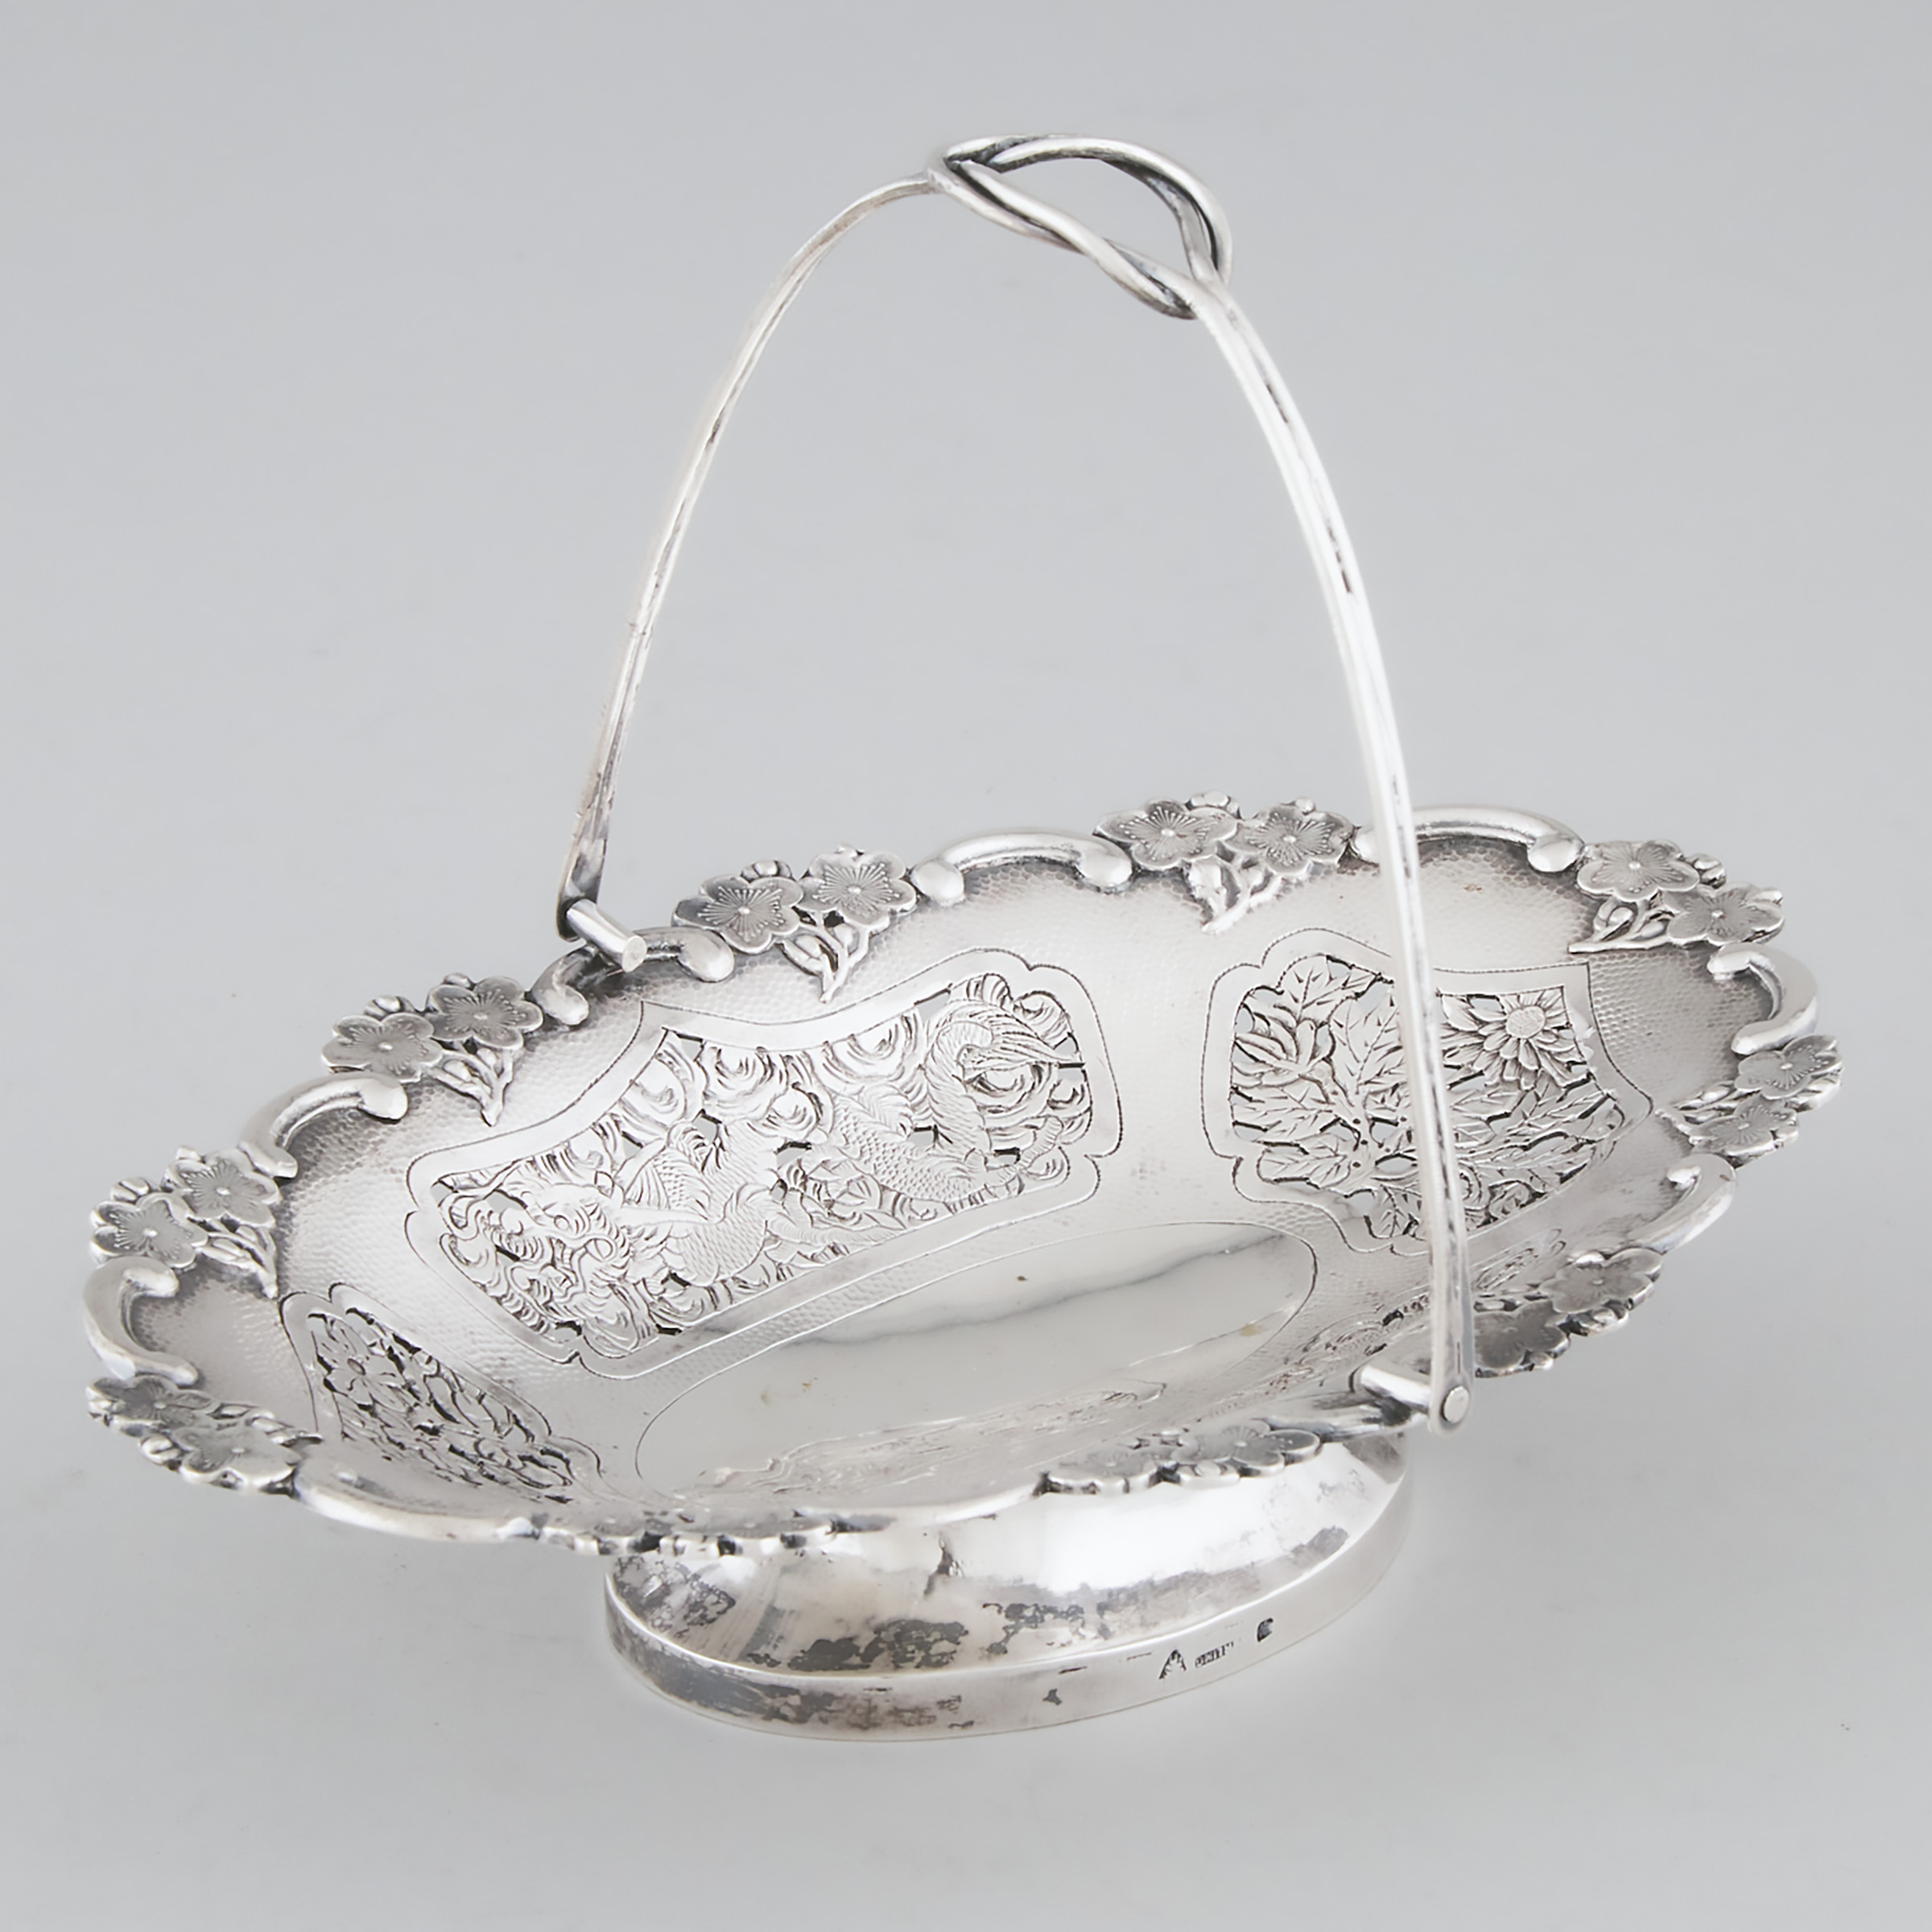 Chinese Export Silver Oval Basket, early 20th century